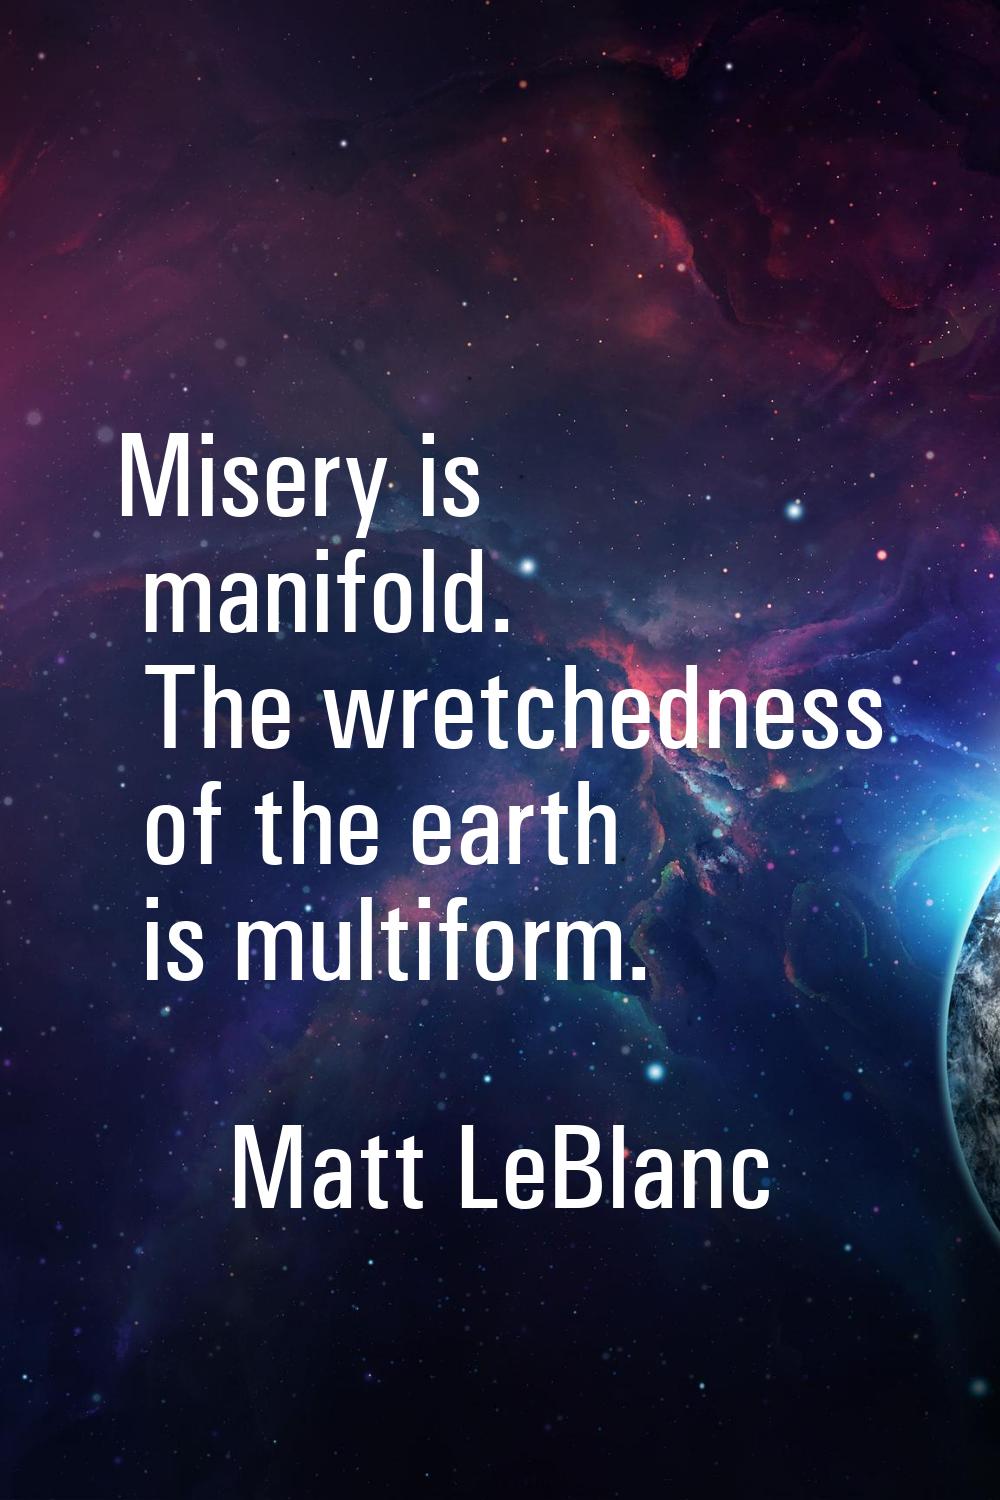 Misery is manifold. The wretchedness of the earth is multiform.